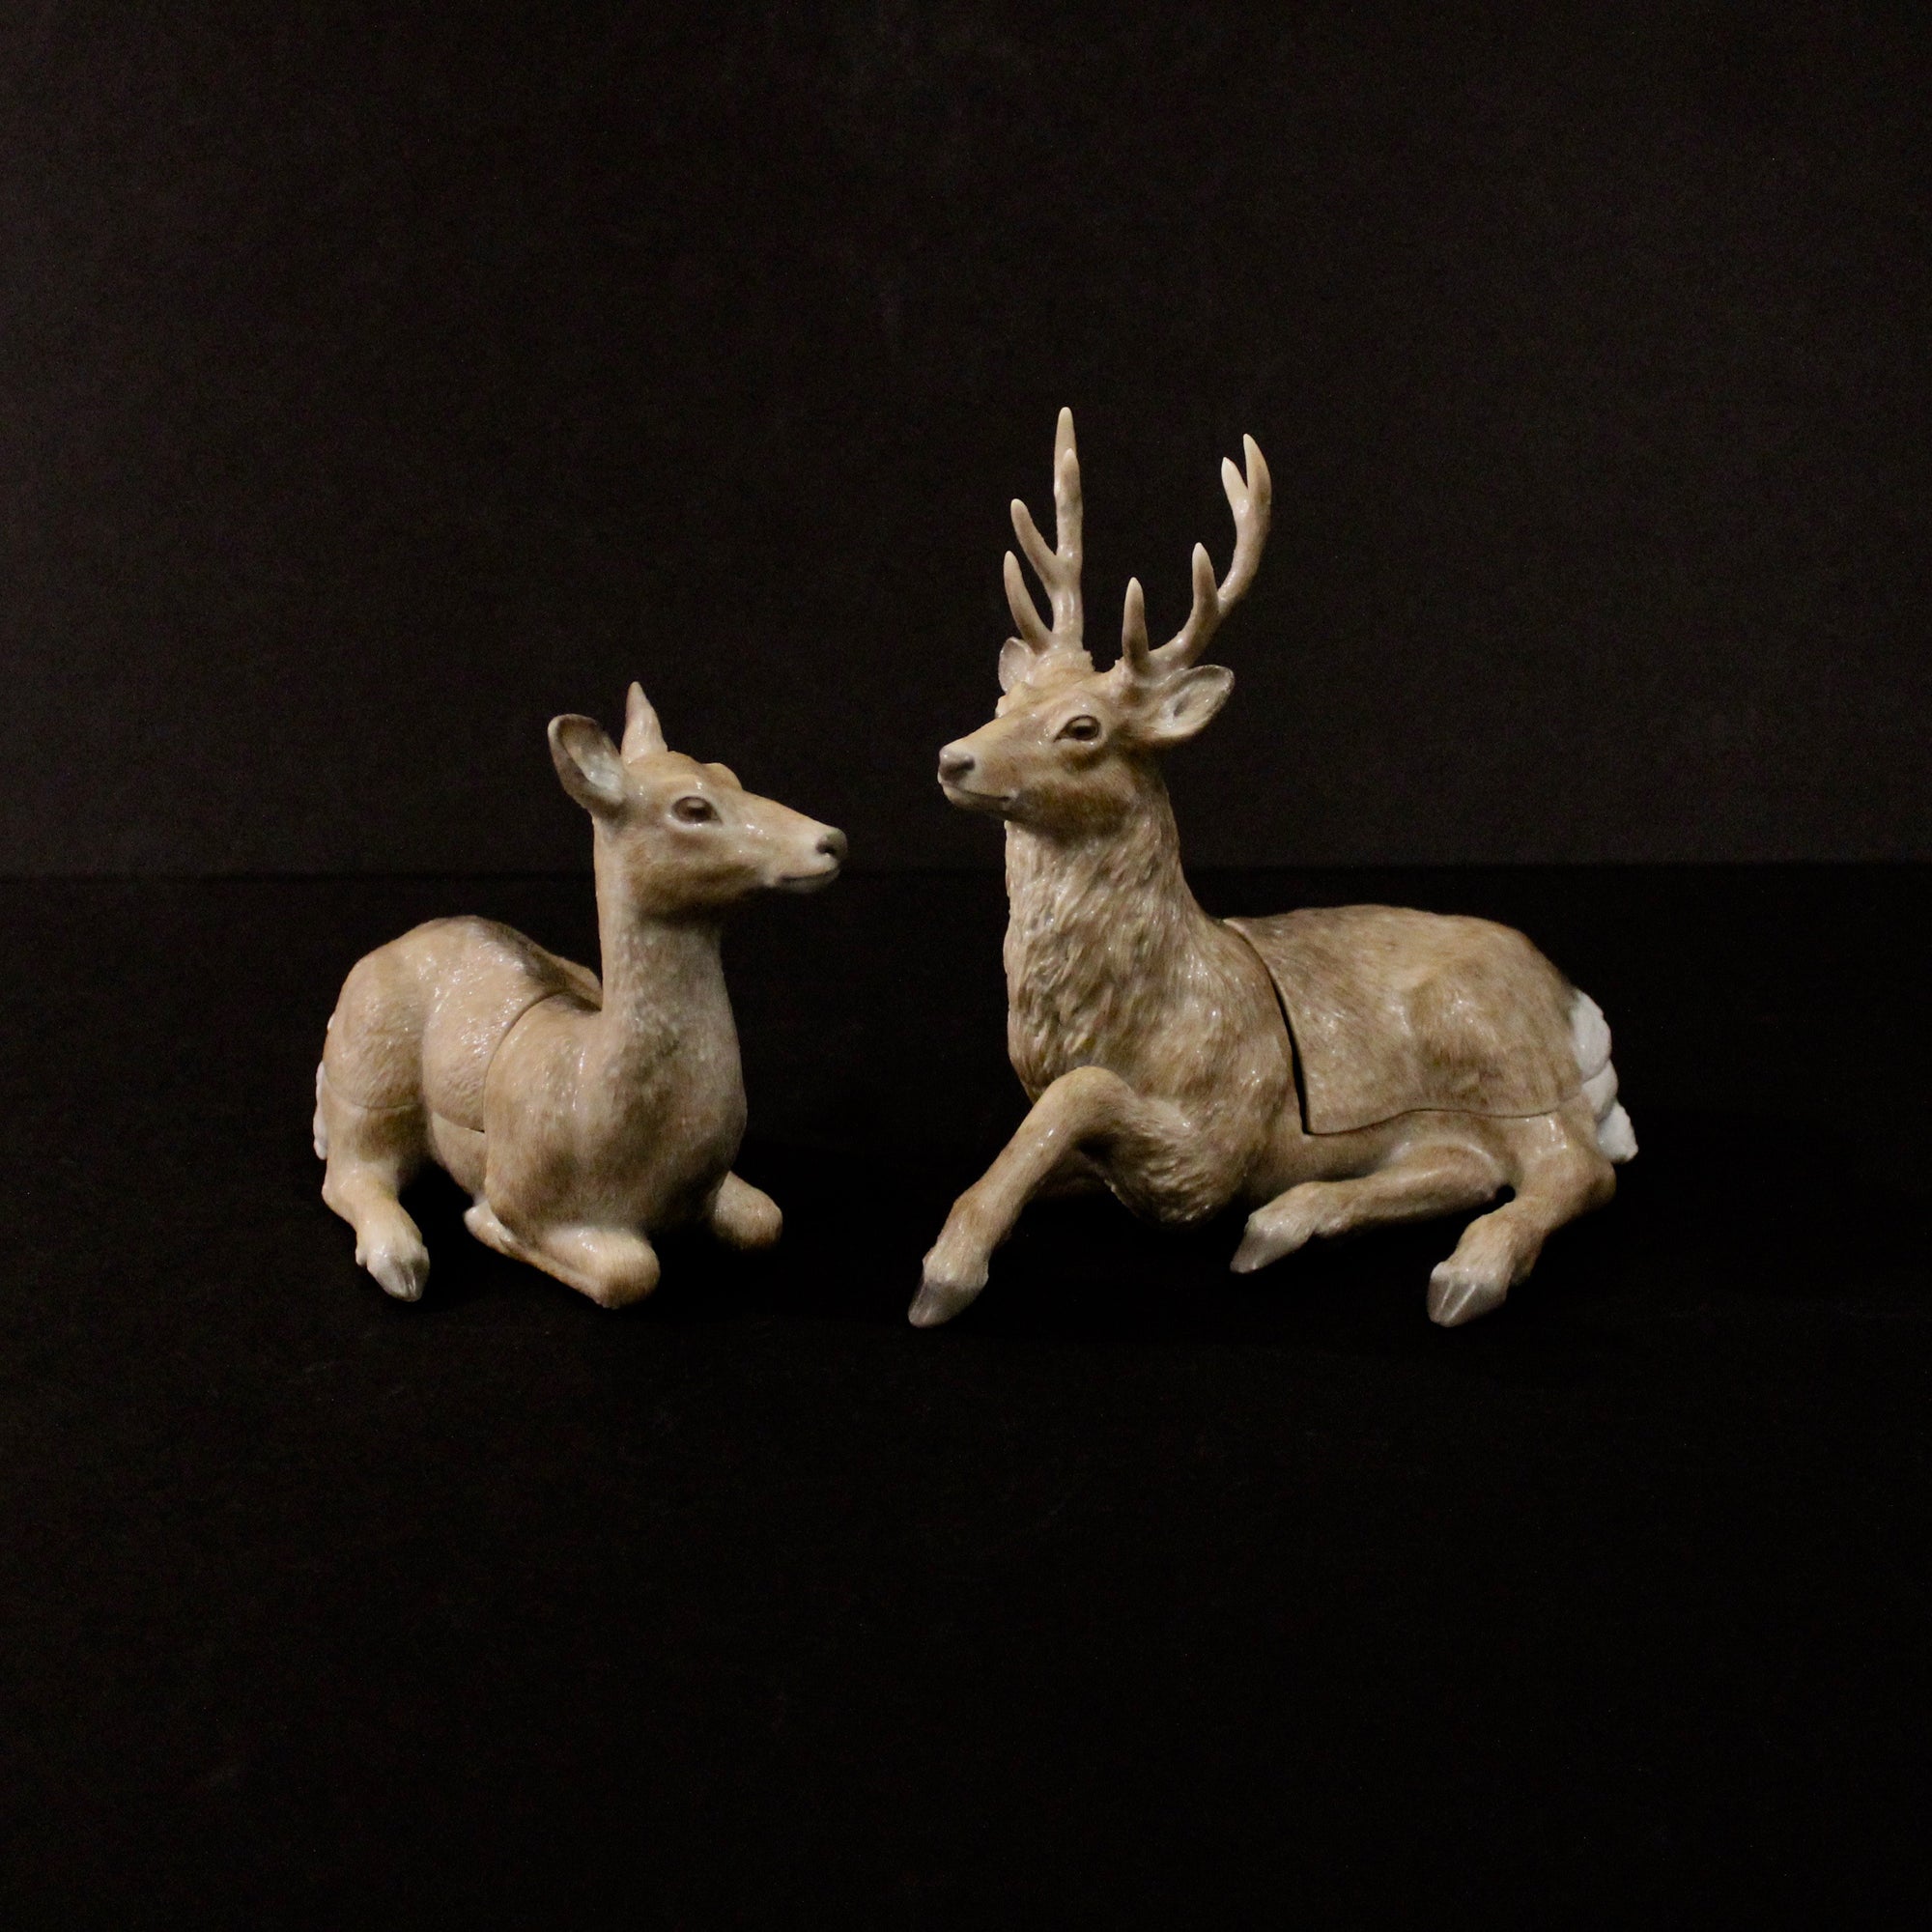 Pair of Deer Male and Female Box by Ruri Takeuchi